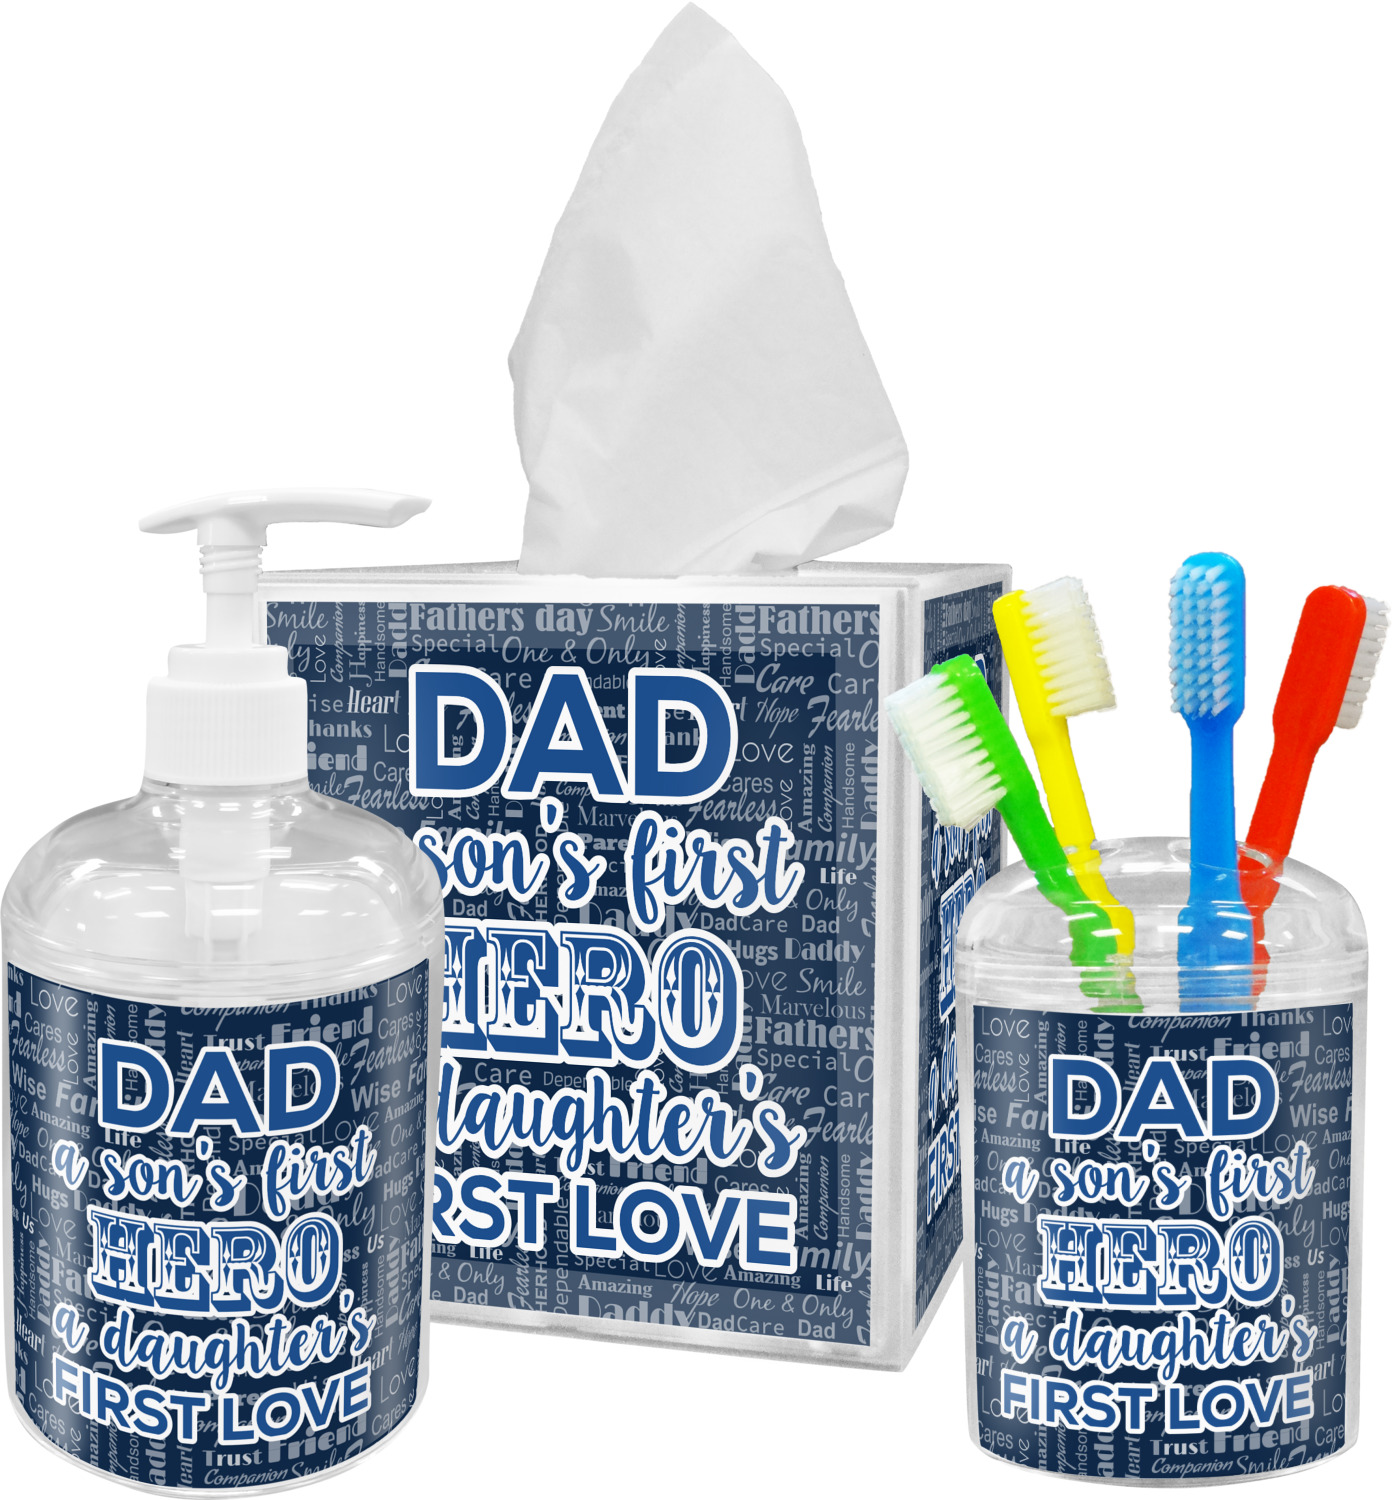 https://www.youcustomizeit.com/common/MAKE/639091/My-Father-My-Hero-Bathroom-Accessories-Set-Personalized.jpg?lm=1686088053